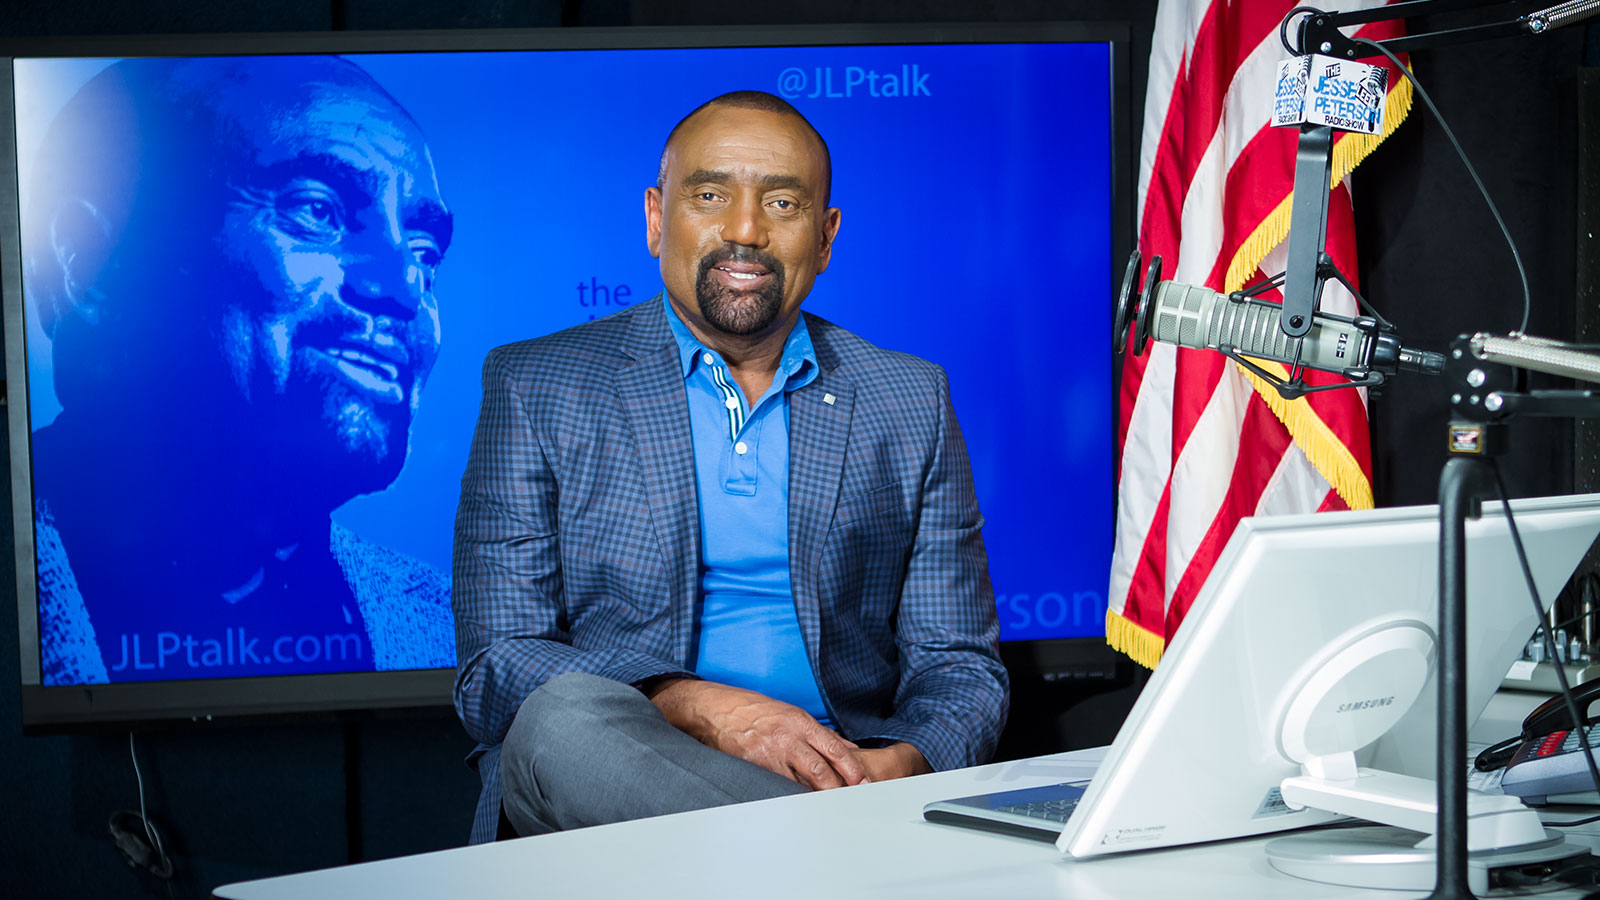 THE JESSE LEE PETERSON SHOW